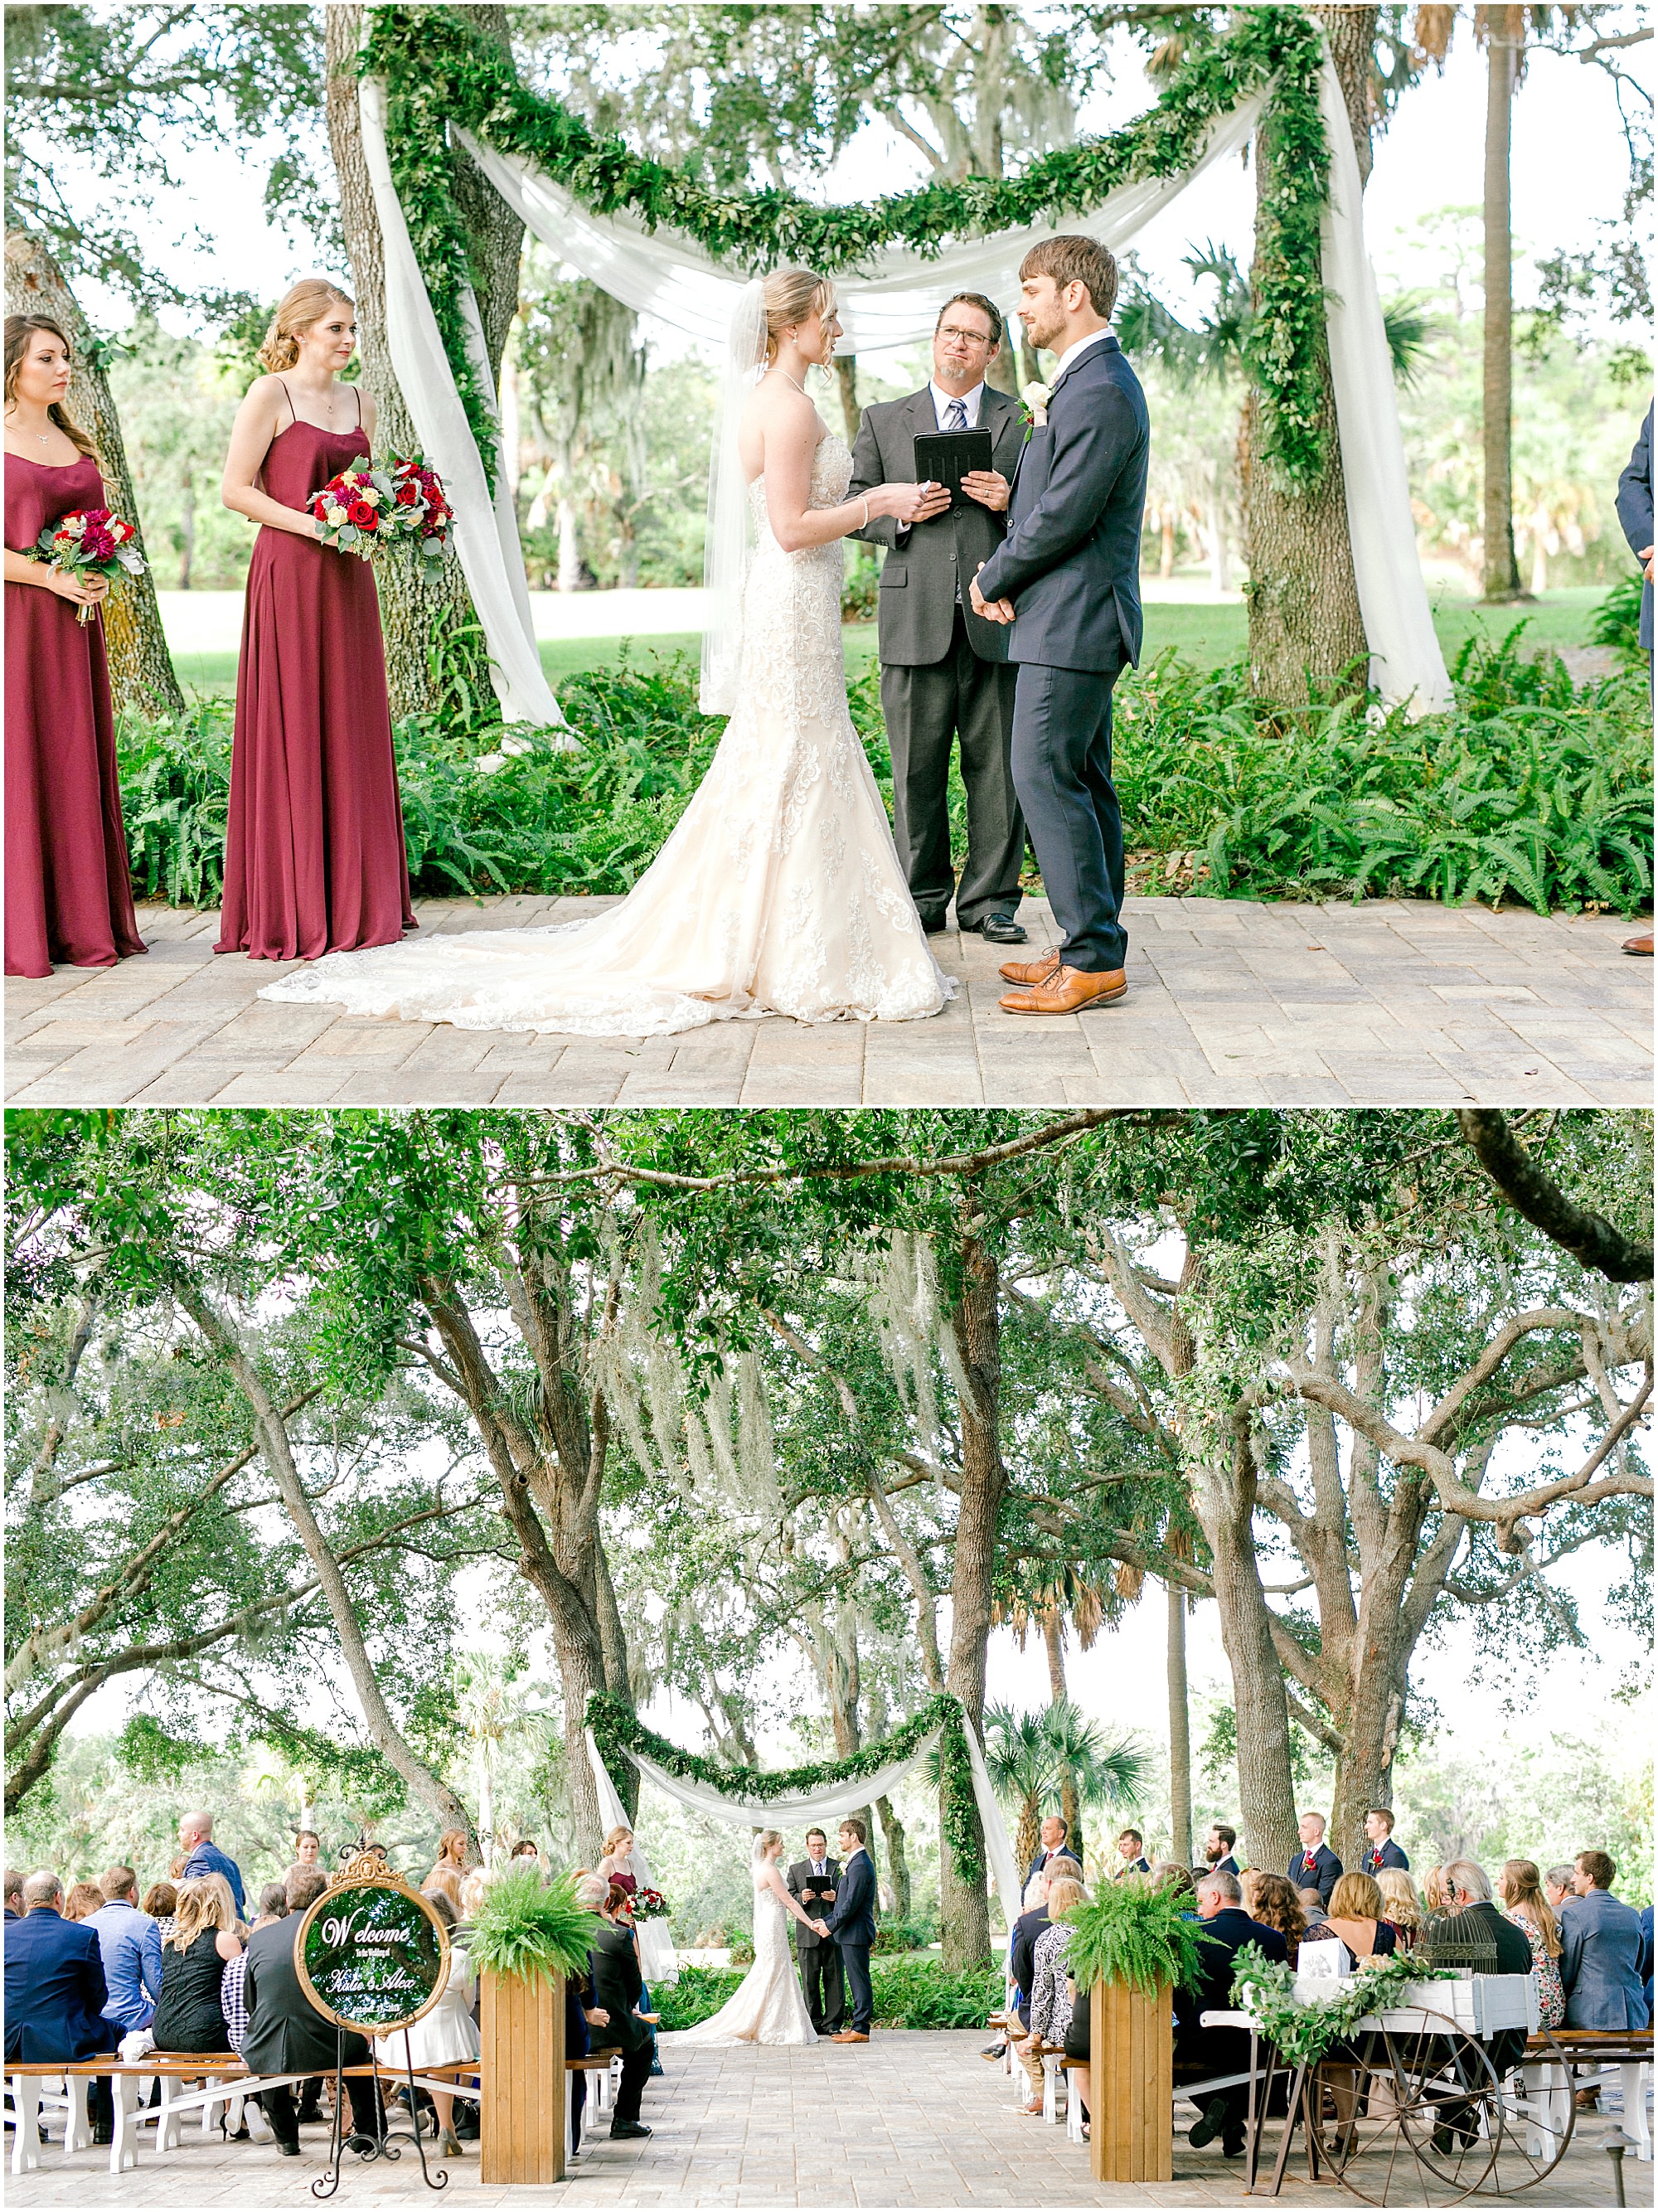 Outdoor wedding ceremony at Up the Creek Farms